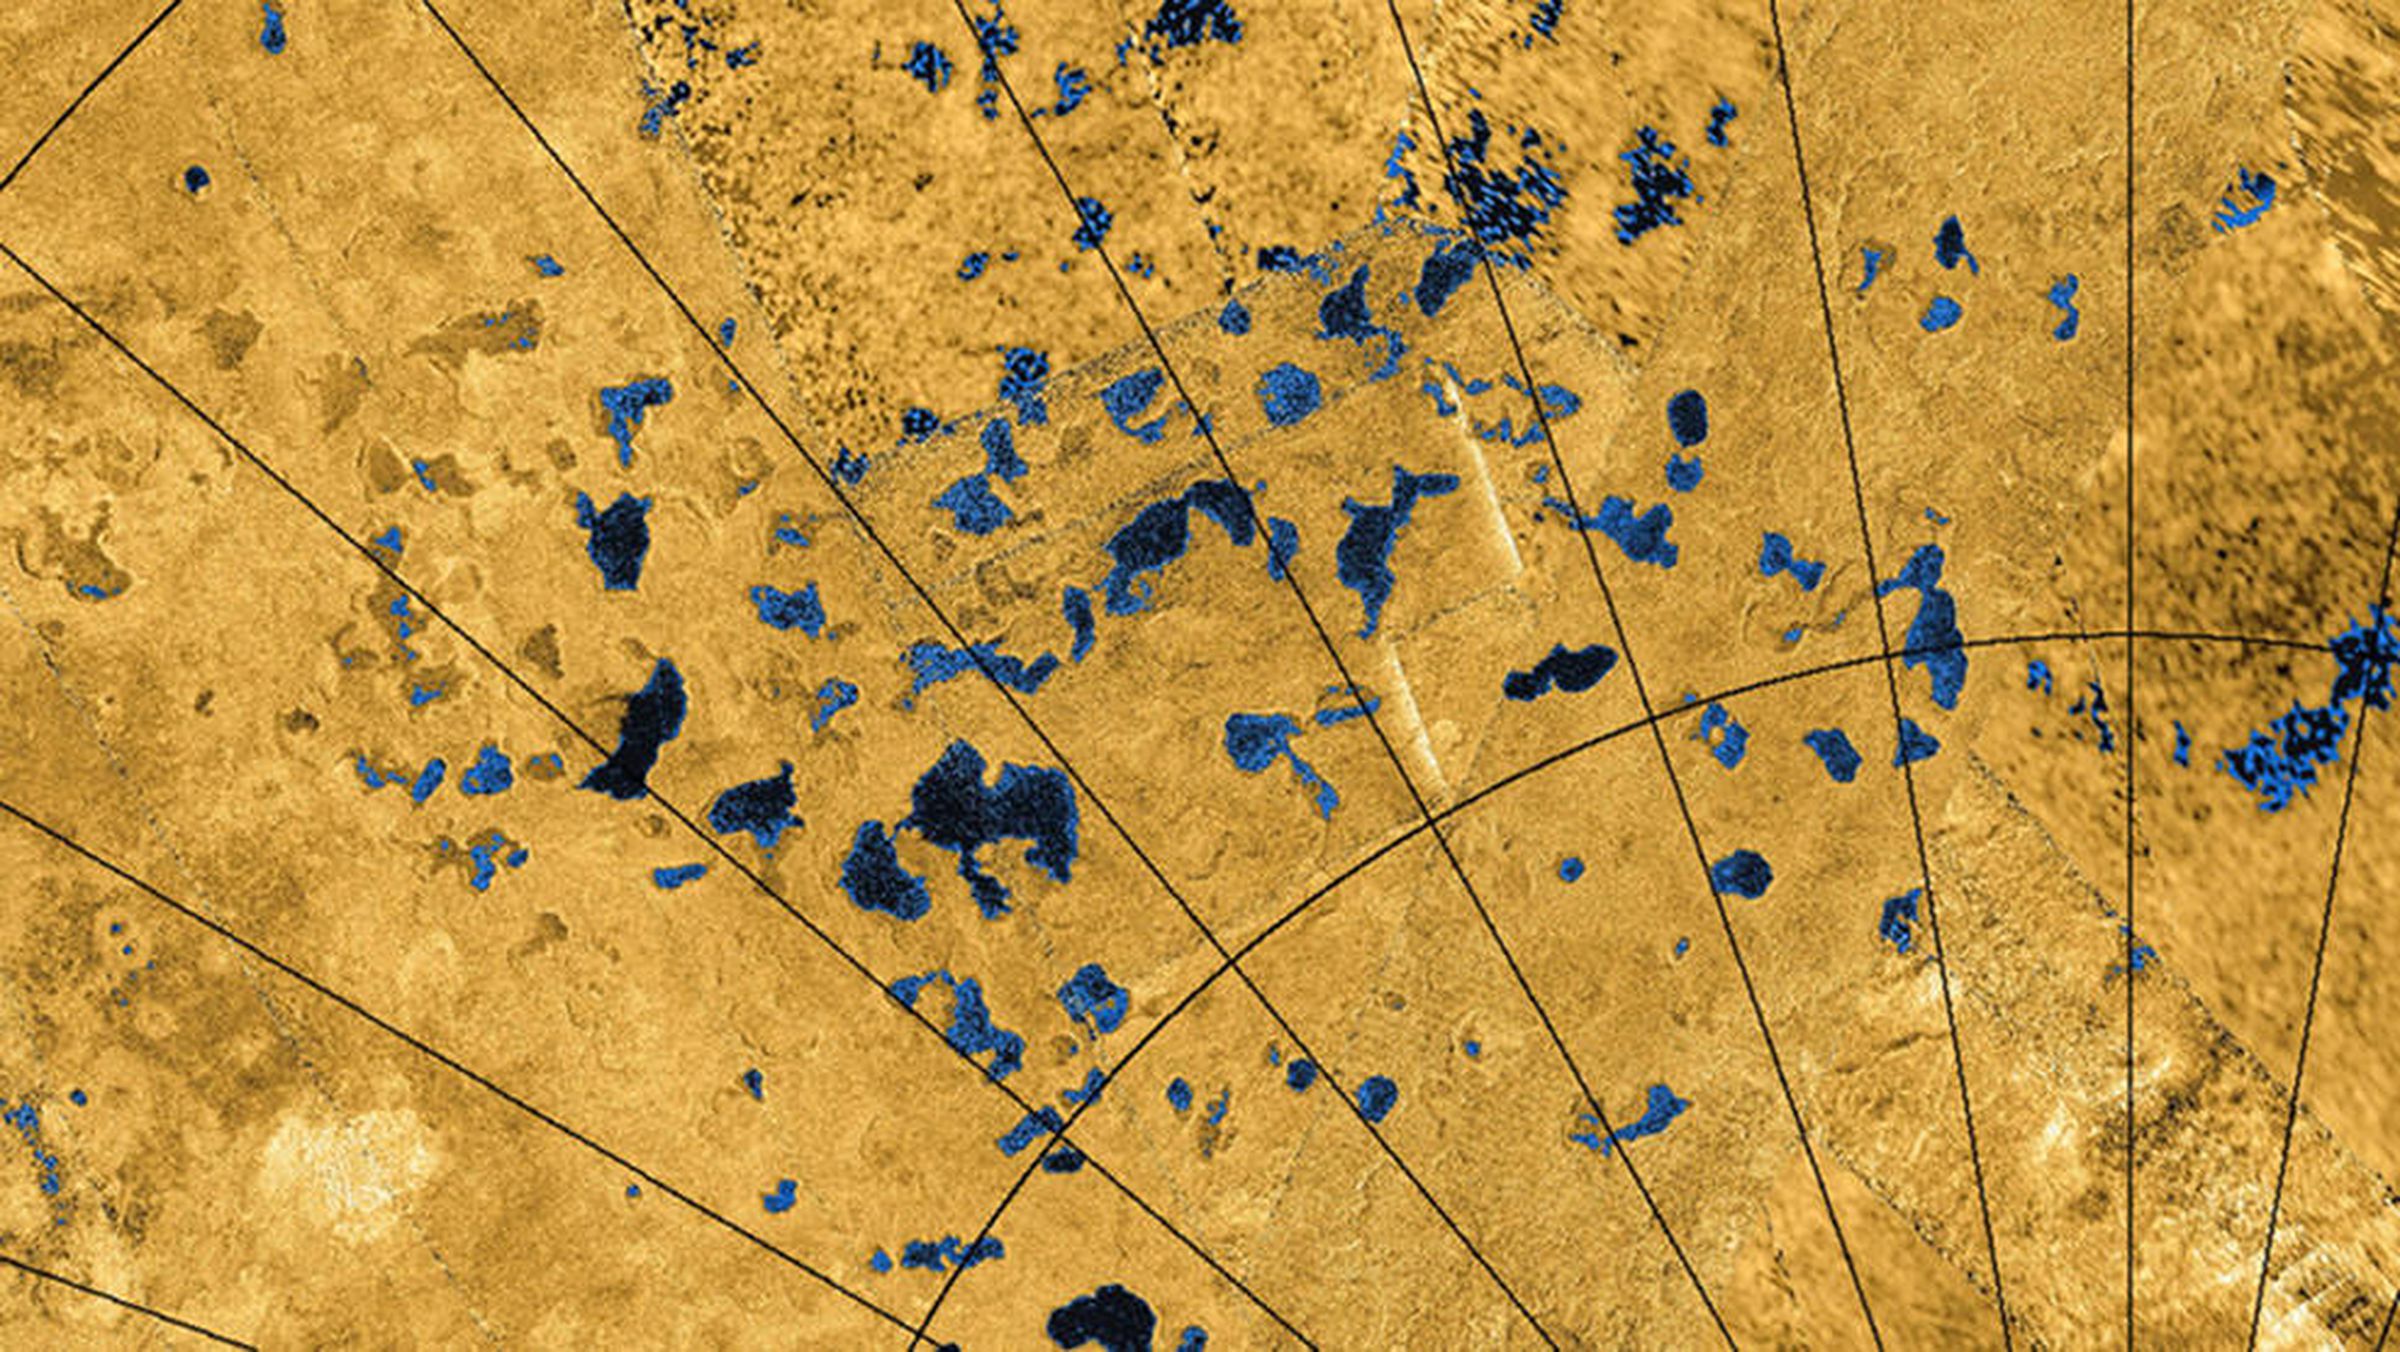 Radar images from NASA’s Cassini spacecraft that show lakes and depressions on Titan’s surface.